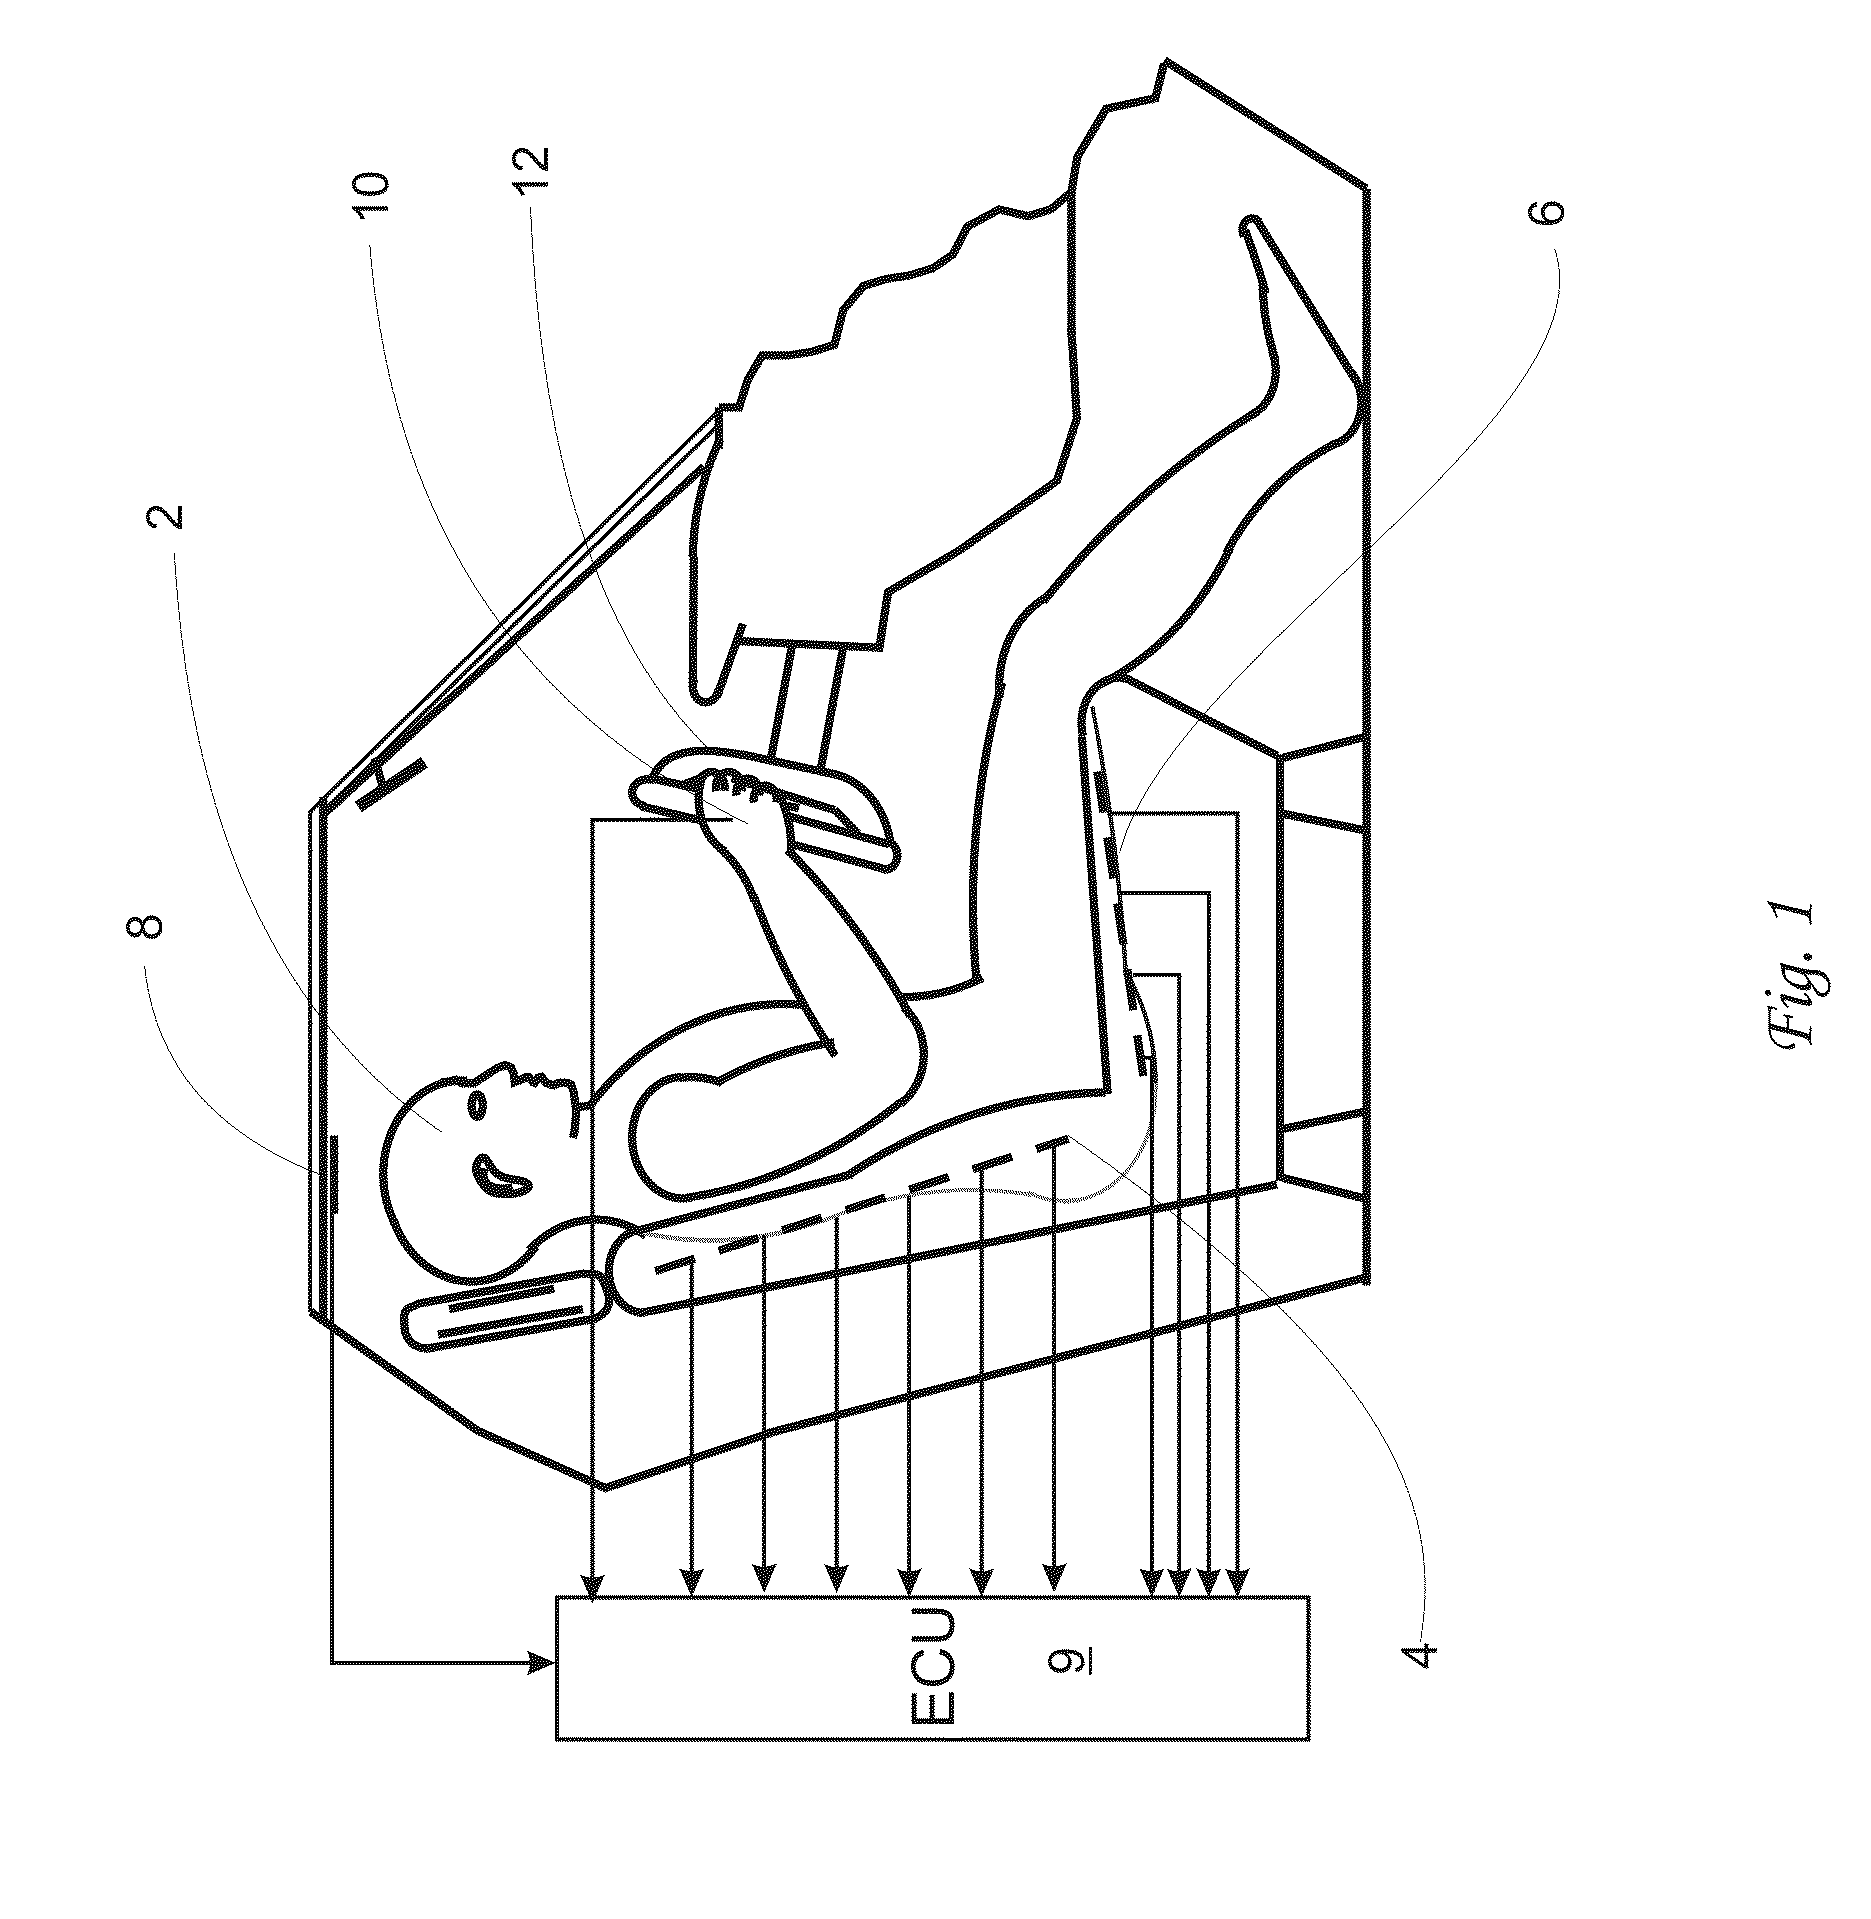 Driver health and fatigue monitoring system and method using optics